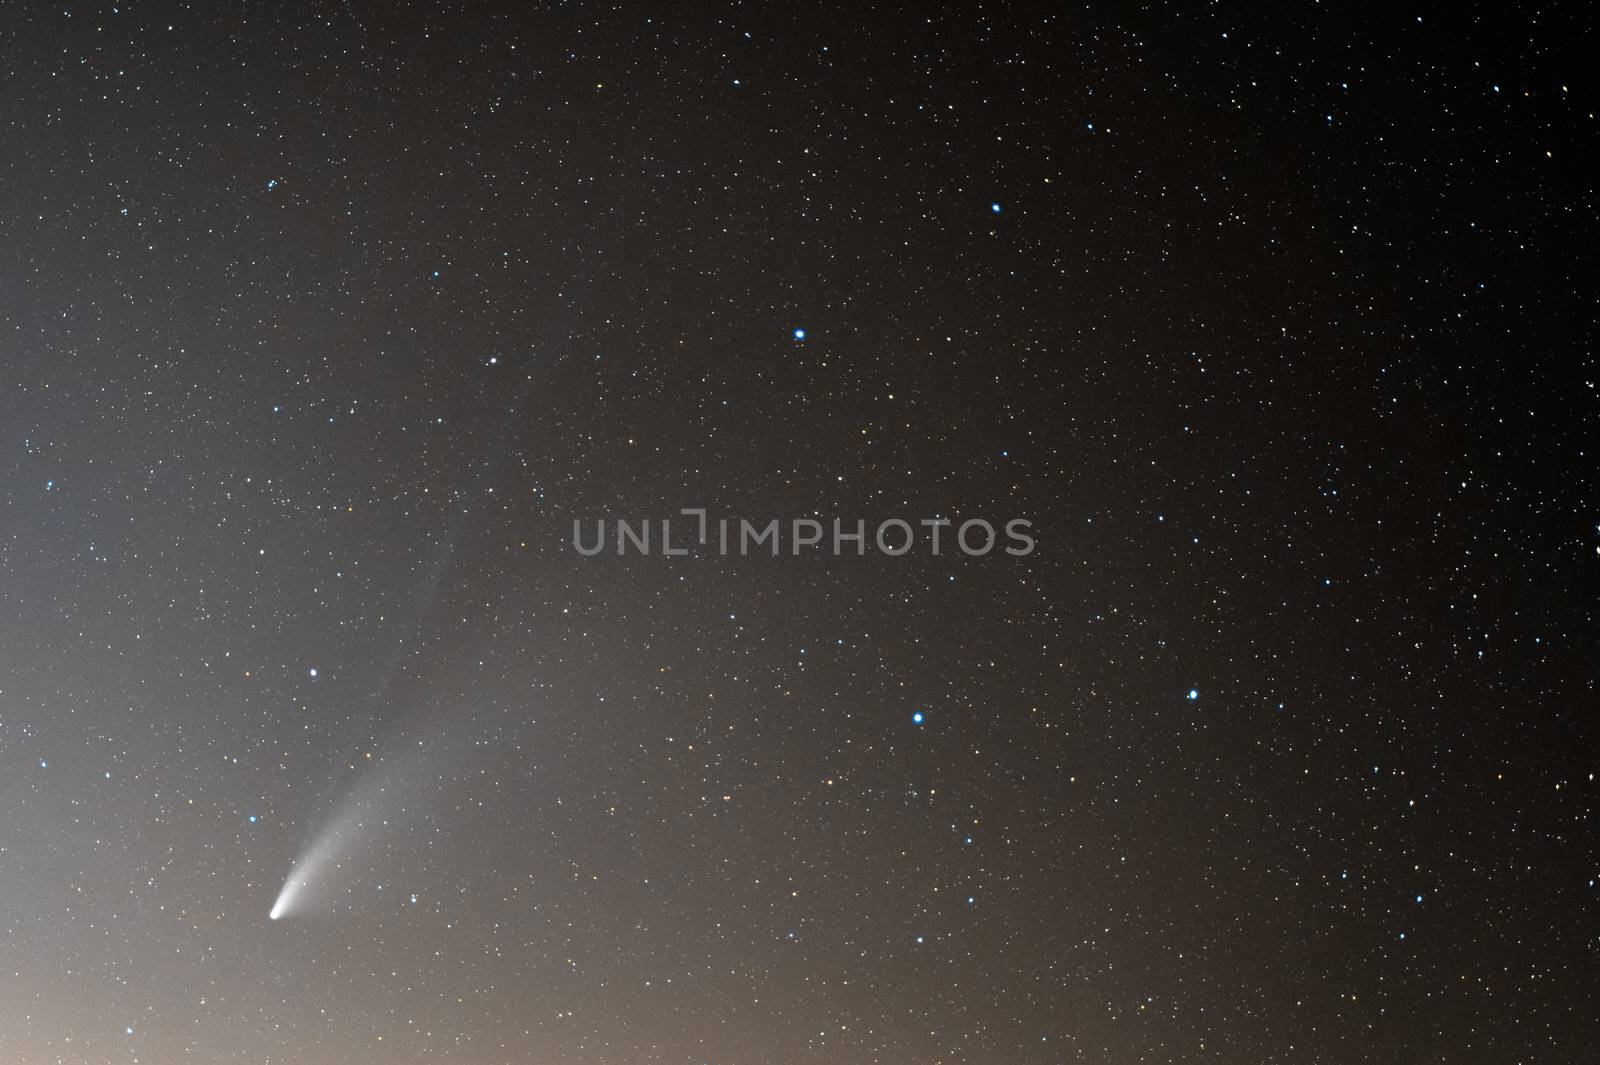 Neowise Comet and its two dust tails below Ursa Major by mauricallari